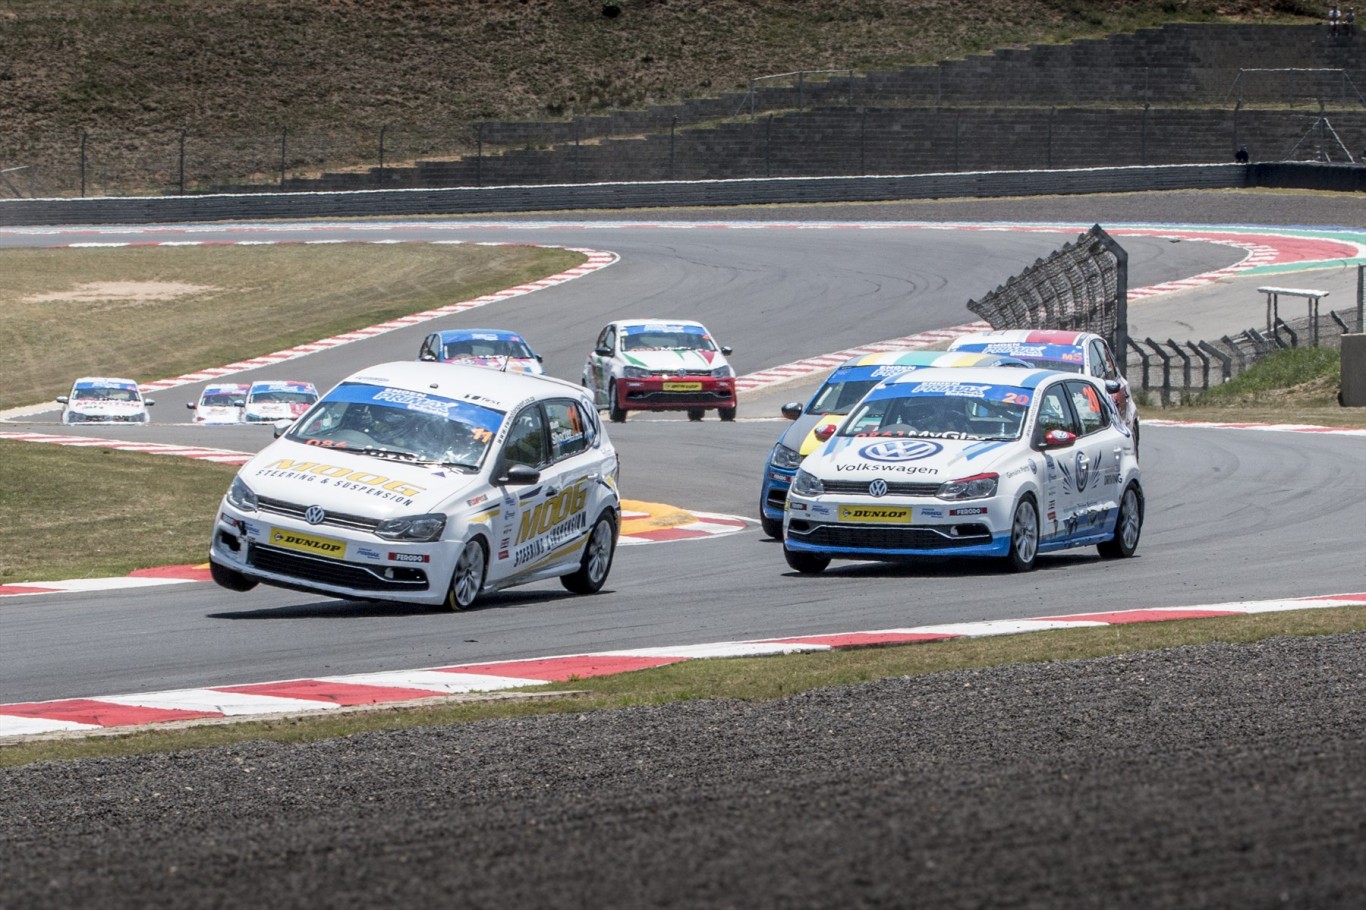 Action-packed season draws to a close in Engen Volkswagen Cup